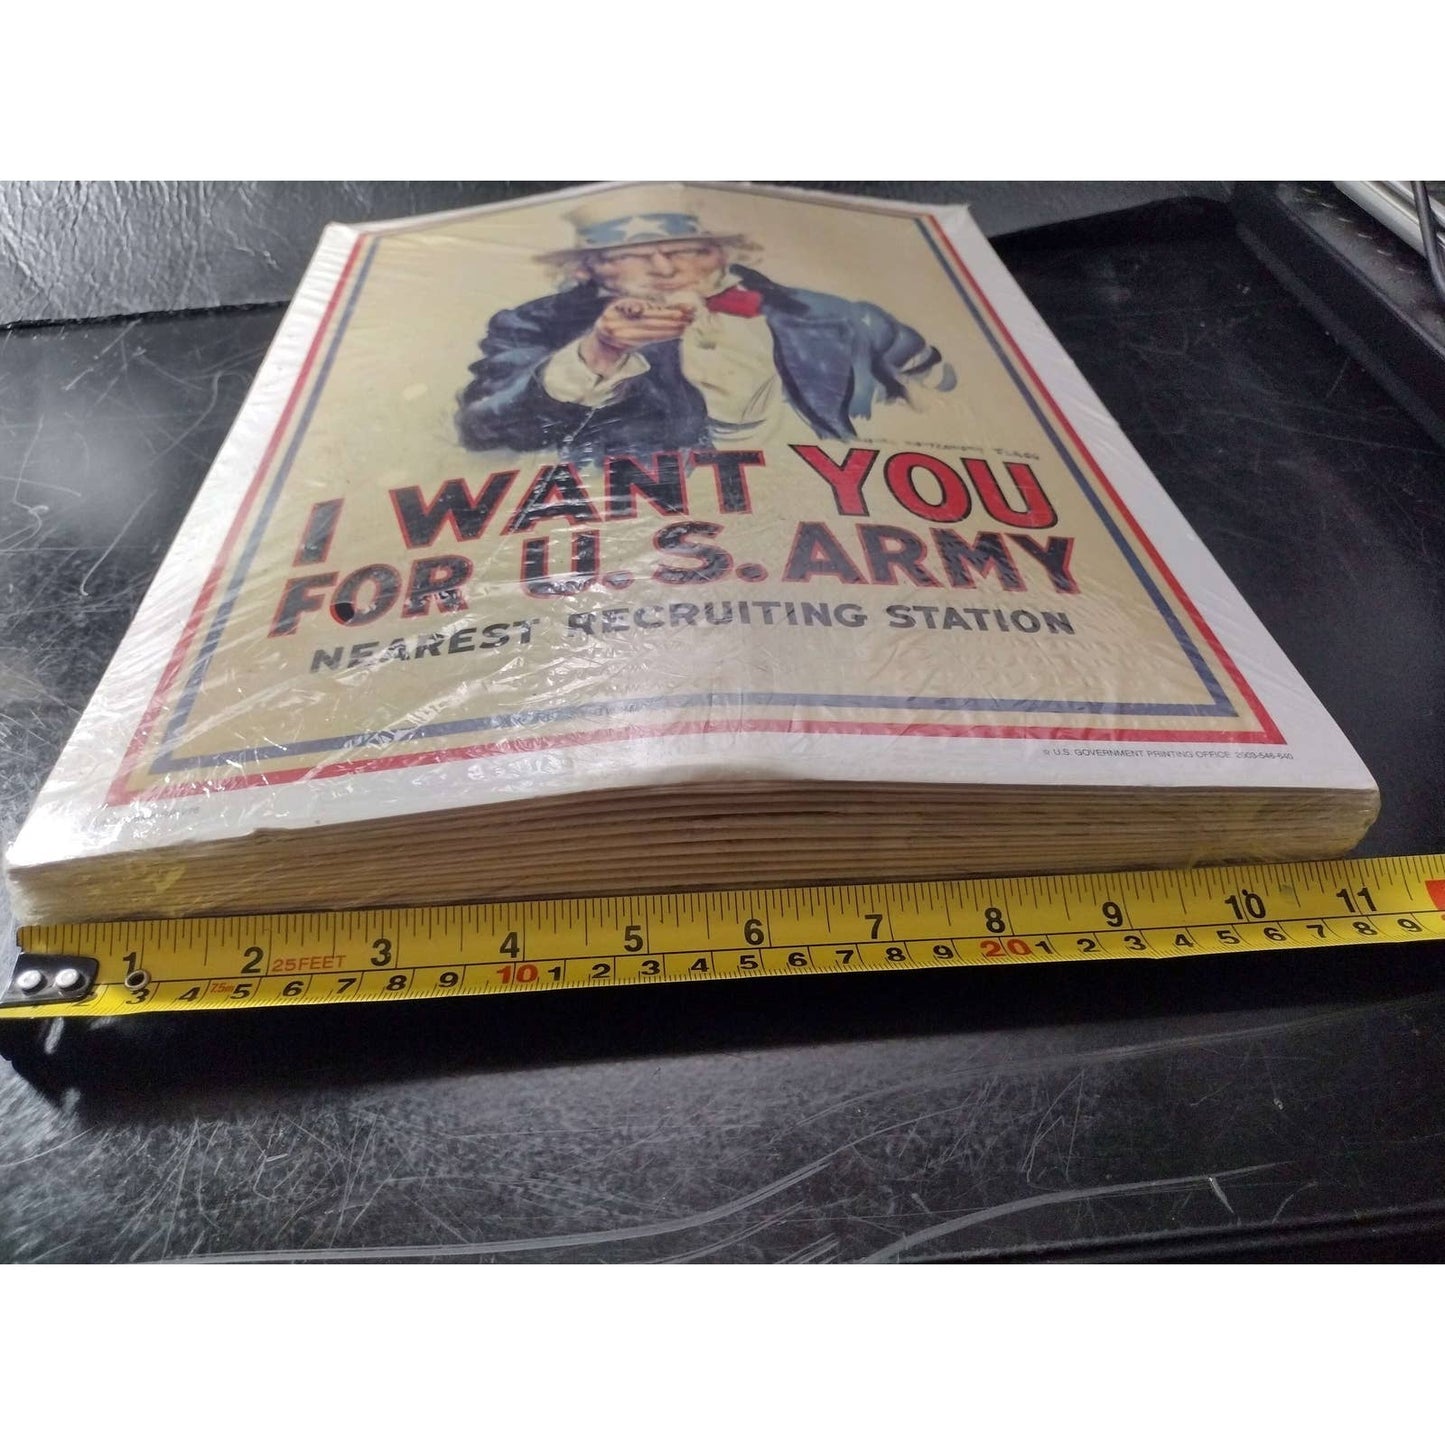 US Army "I Want You" Uncle Sam Genuine Recruiting Poster Stand Up! | FREE Shipping | US Army